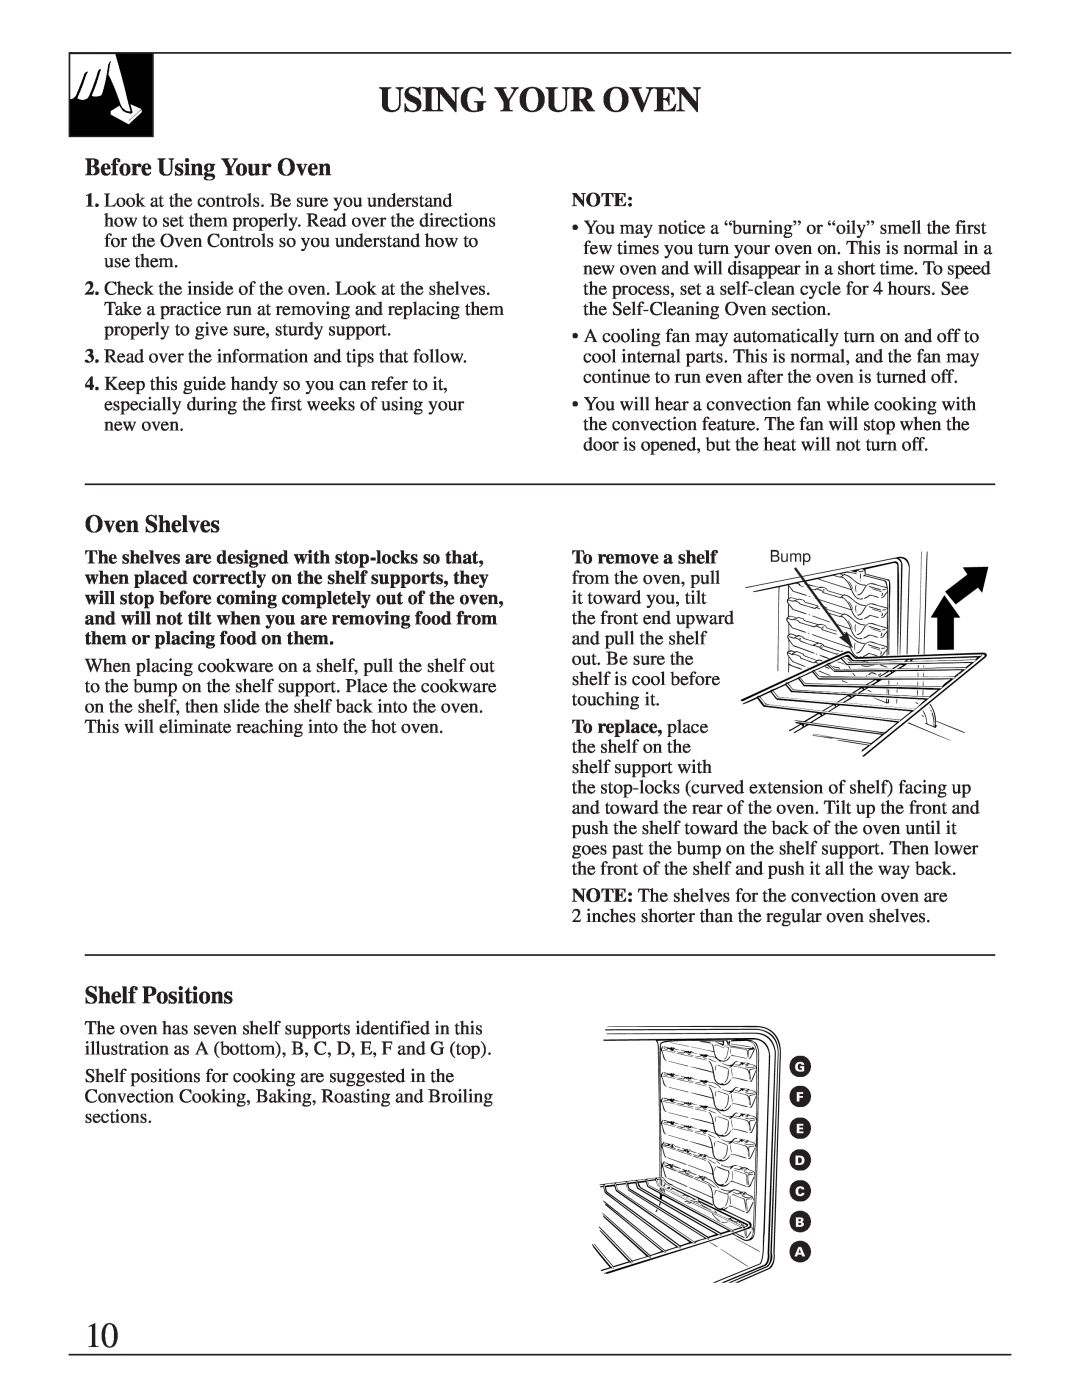 GE 164D2966P205-1 manual Before Using Your Oven, Oven Shelves, Shelf Positions 